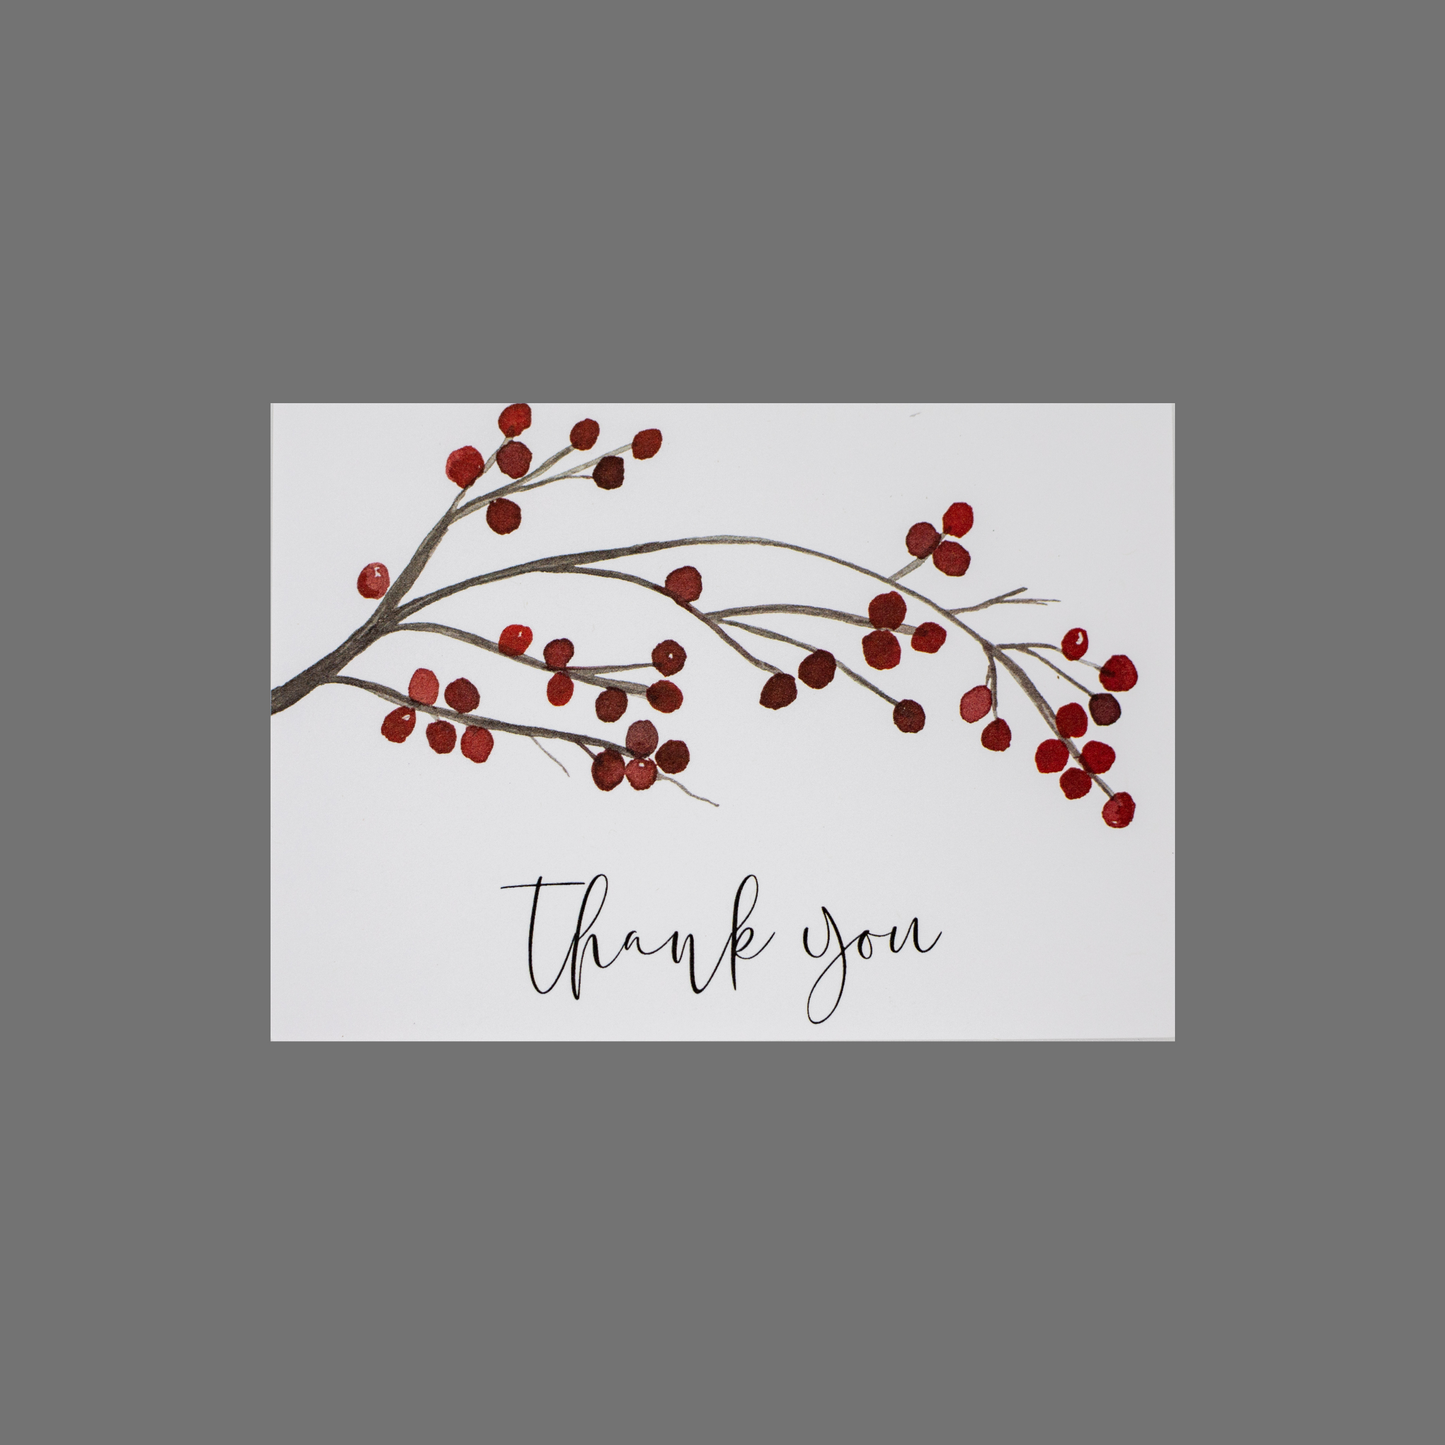 Pack of 8 - "Thank you" with Large Berries on a Single Branch (10094)